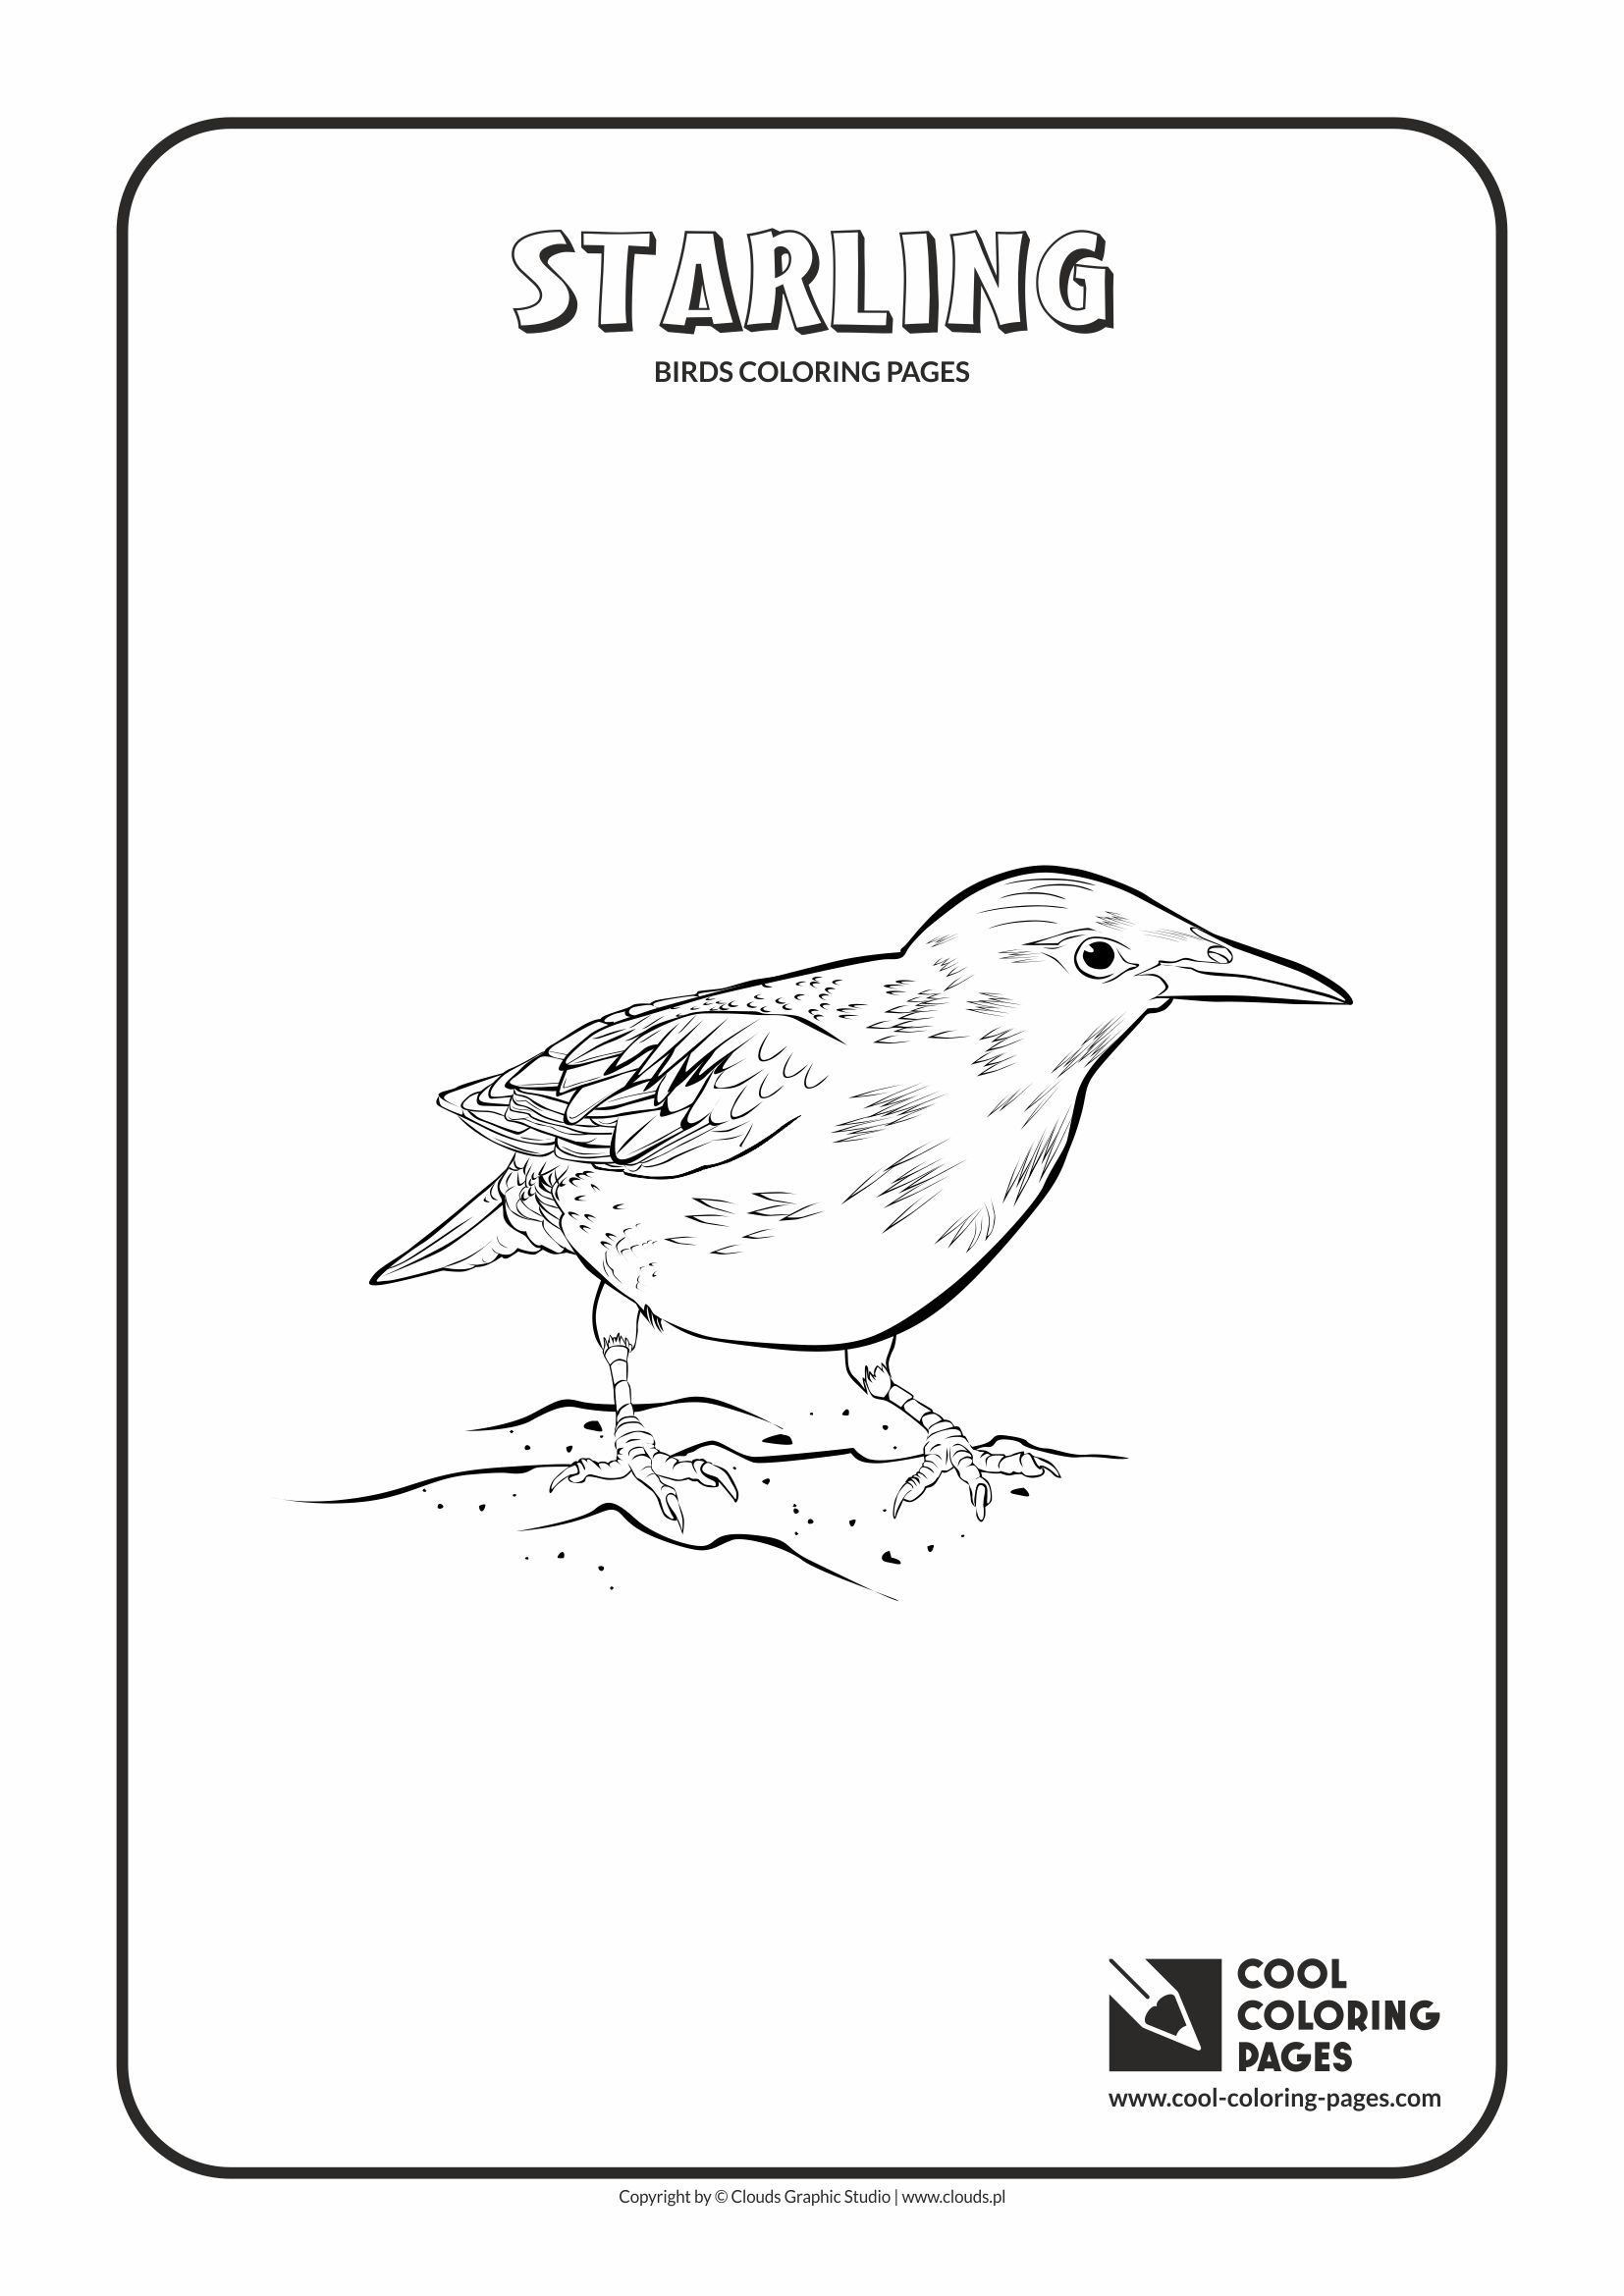 Cool Coloring Pages - Animals / Starling / Coloring page with starling